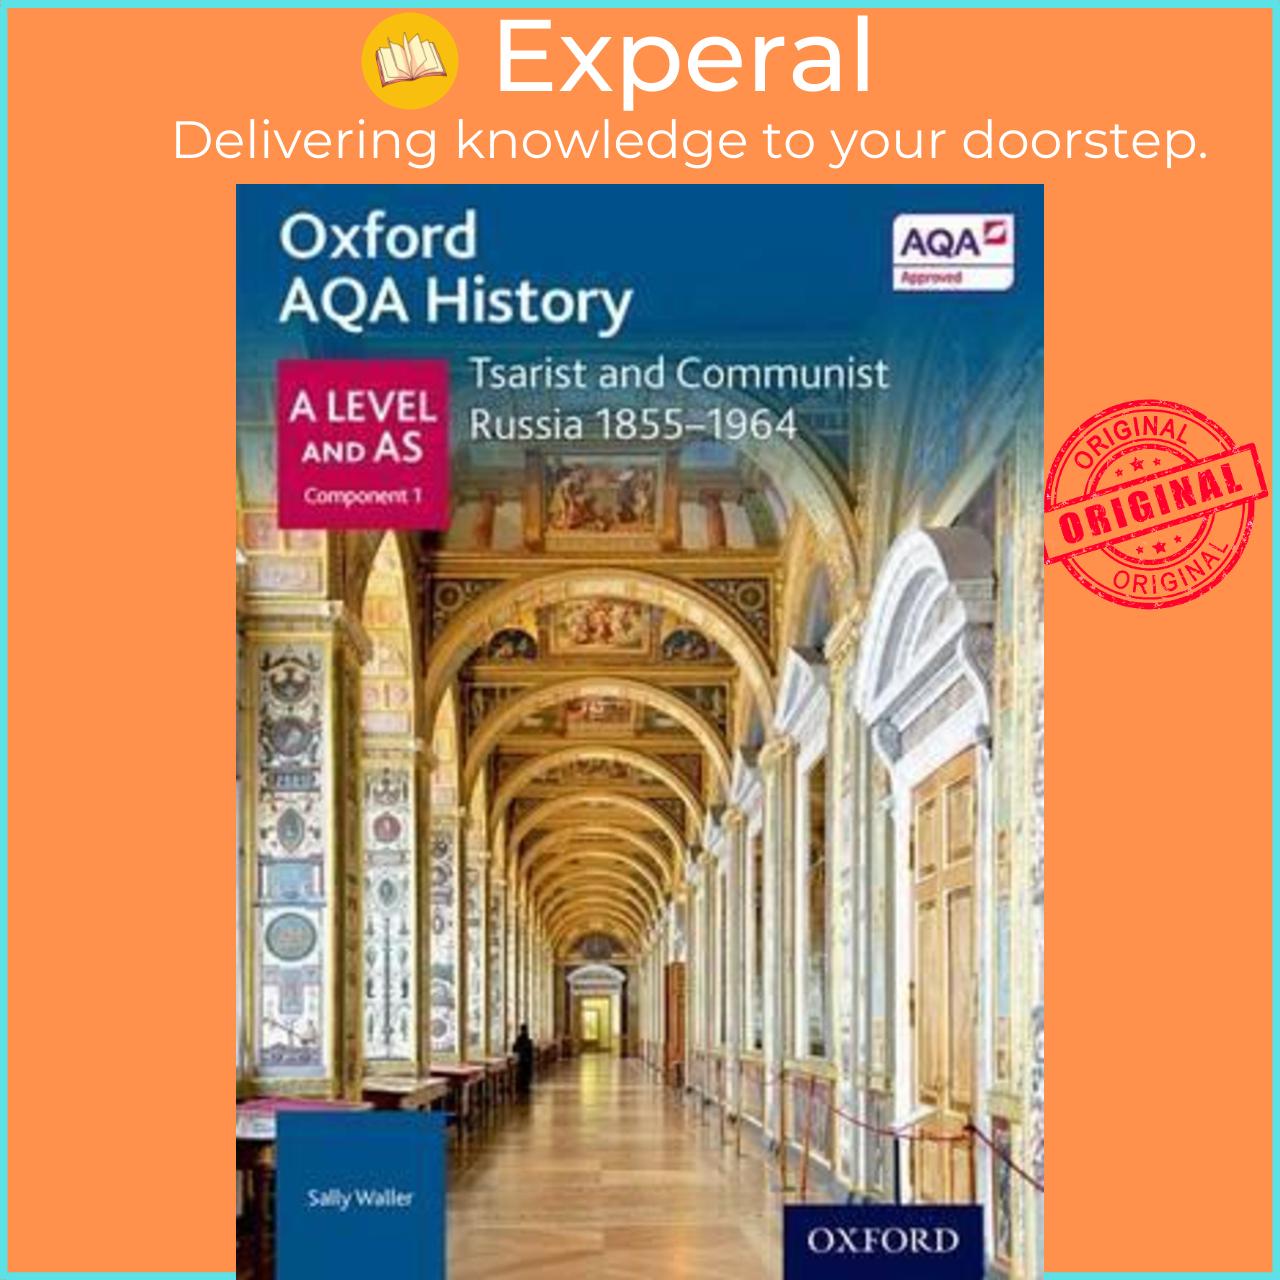 Sách - Oxford AQA History for A Level: Tsarist and Communist Russia 1855-1964 by Sally Waller (UK edition, paperback)